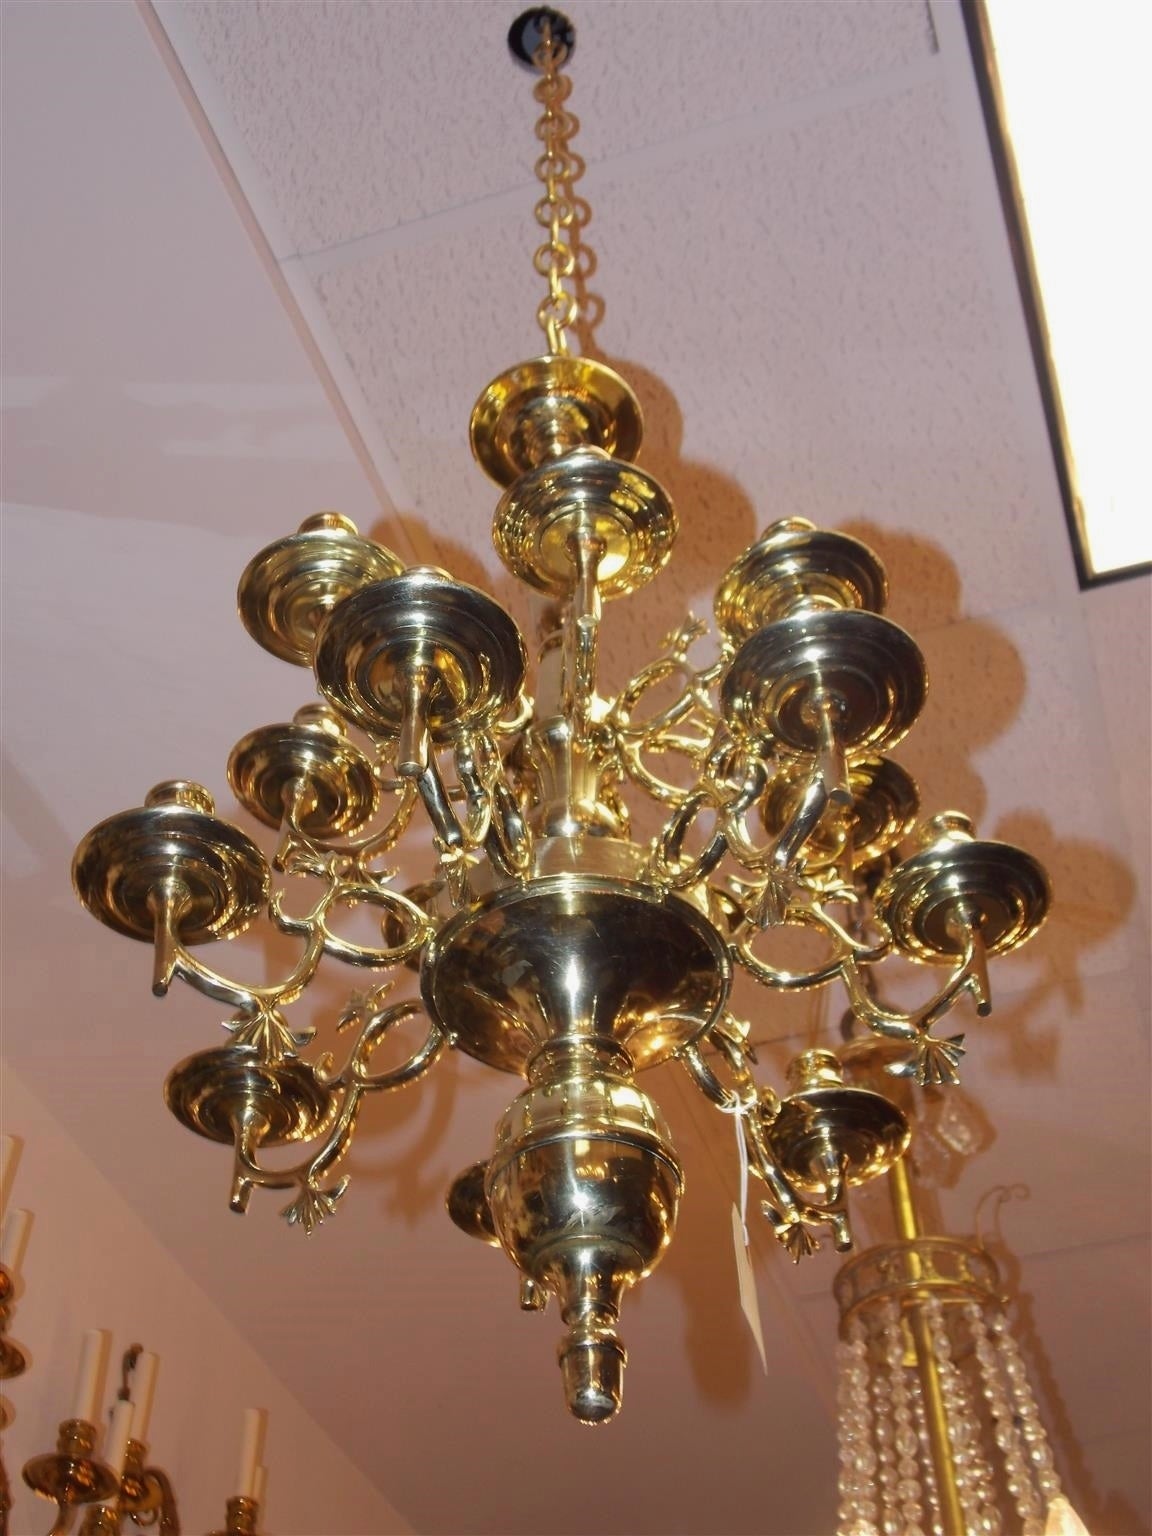 Dutch colonial two-tier 13-light chandelier with centered bulbous column, scrolled decorative arms, original bobaches and terminating with a brass ball finial. Mid-18th Century. Chandelier is candle powered and can be electrified if desired.